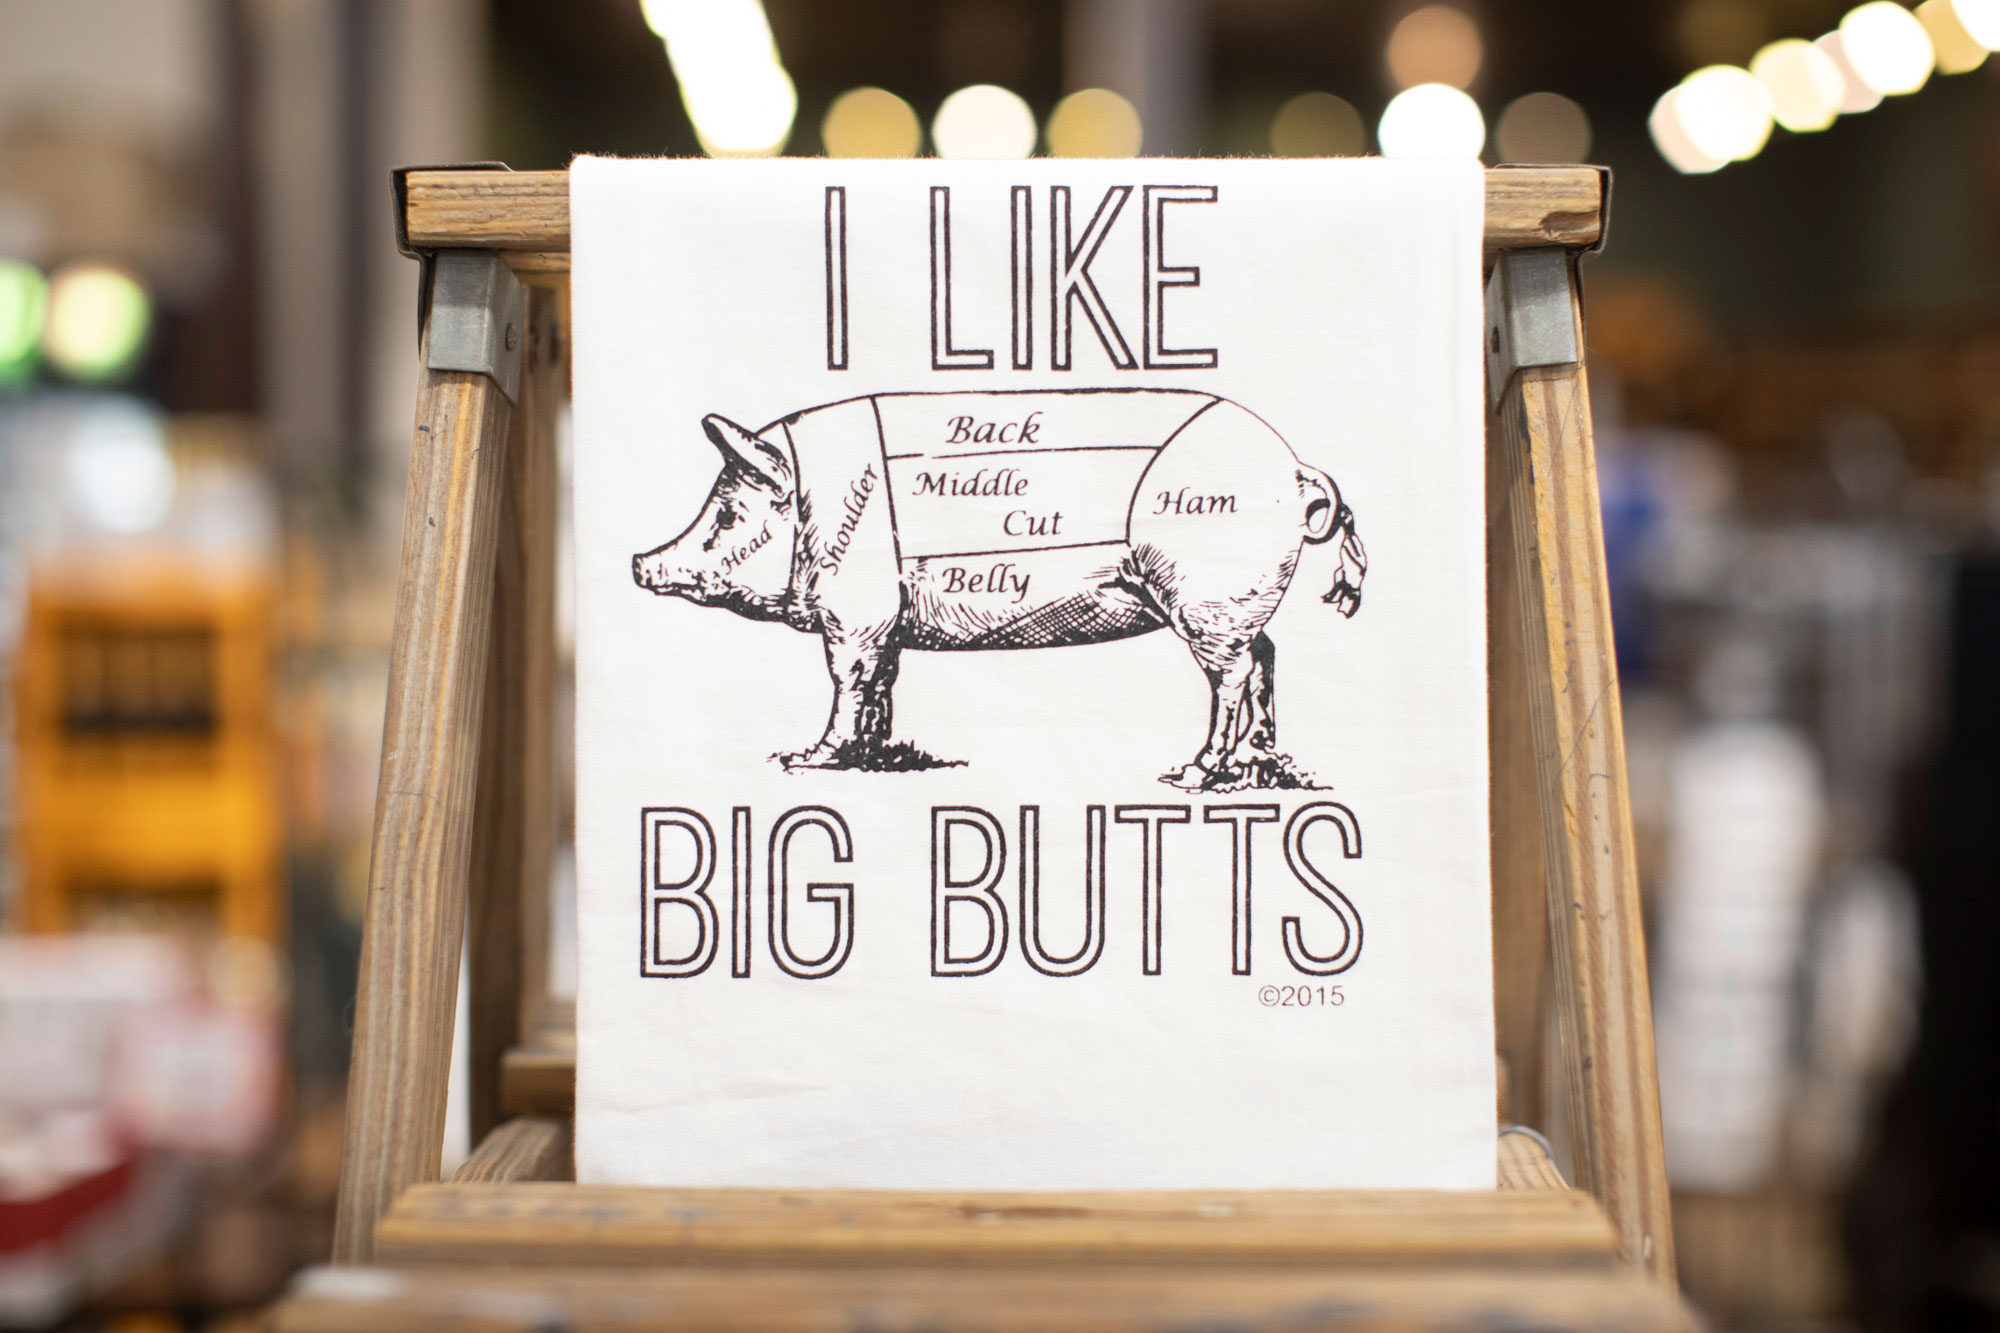 photo of a kitchen towel saying I like Big Butts with illustration of a pig